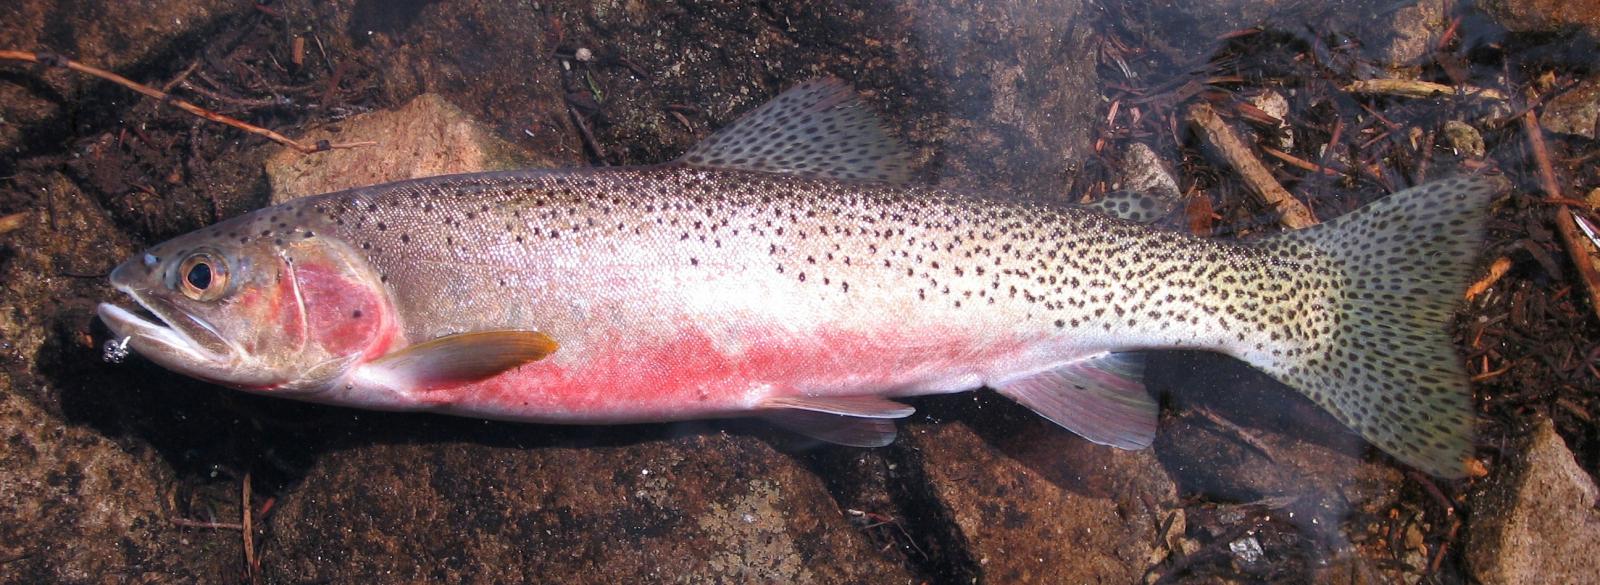 Freshly caught cutthroat trout lying on the rocks with reddish belly and dark spots on back and fins